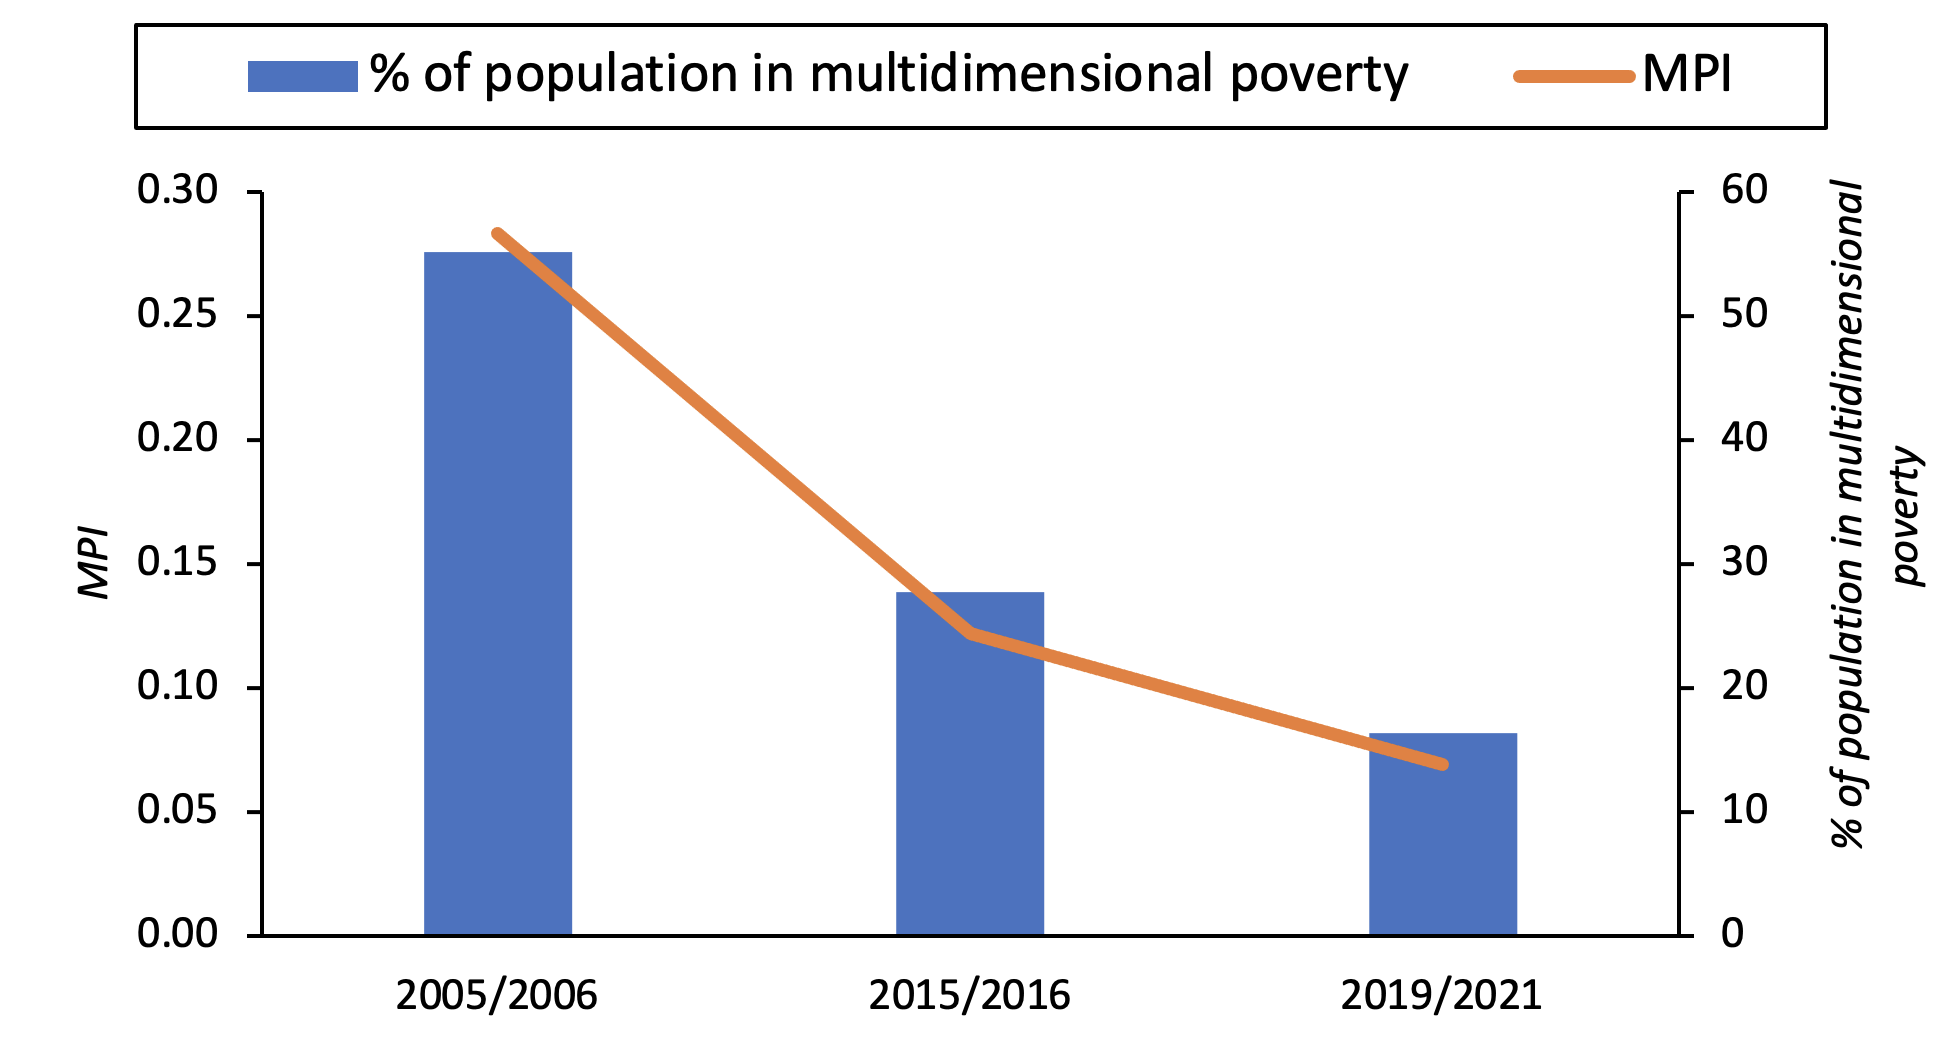 What makes one poor understanding the Multidimensional Poverty Index